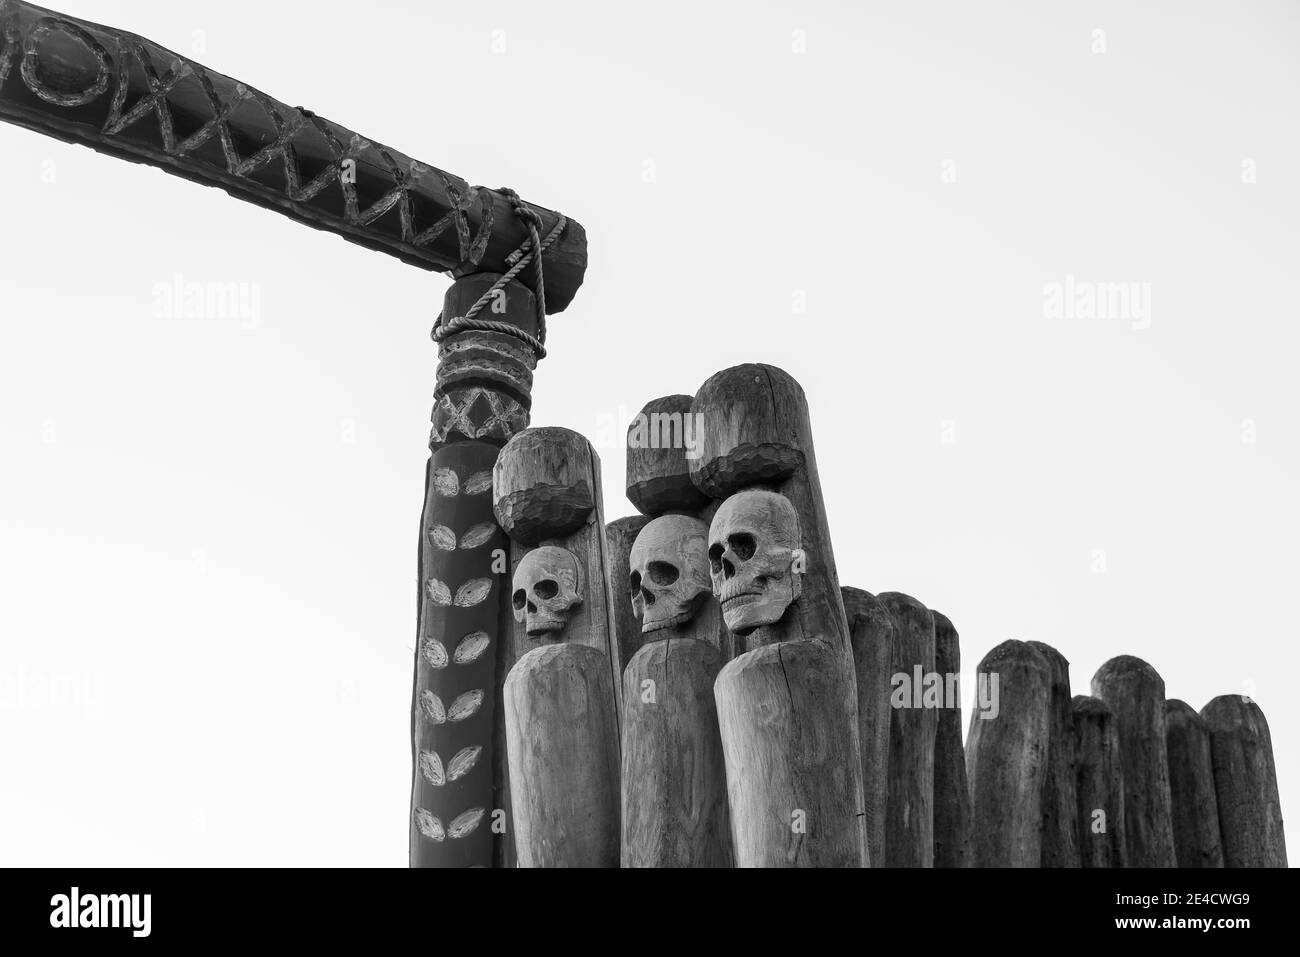 Germany, Saxony-Anhalt, Pömmelte, carved skulls in the ring sanctuary, a prehistoric circular moat, which is also called the German Stonehenge by archaeologists. Stock Photo